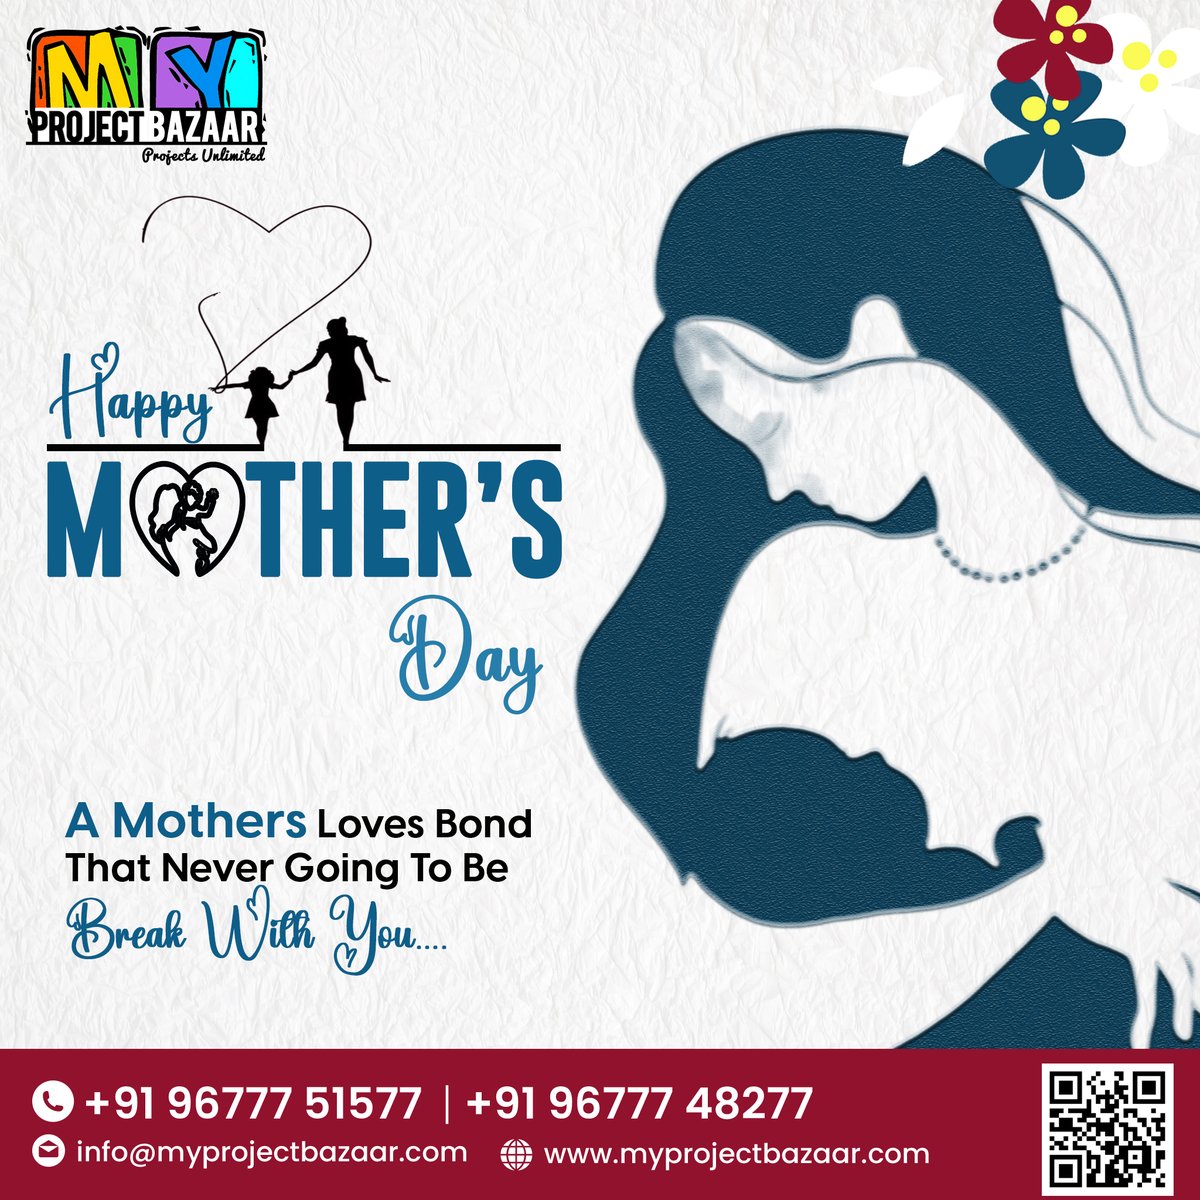 🌸 Happy Mothers Day to all the incredible moms out there! 🌸 

#myprojectbazaar #AllDomains #php #PHPProjects #FinalYearProjects #InnovationHub #HappyMothersDay #ProjectSuccess#MyProjectBazzar #Django #CodingRevolution